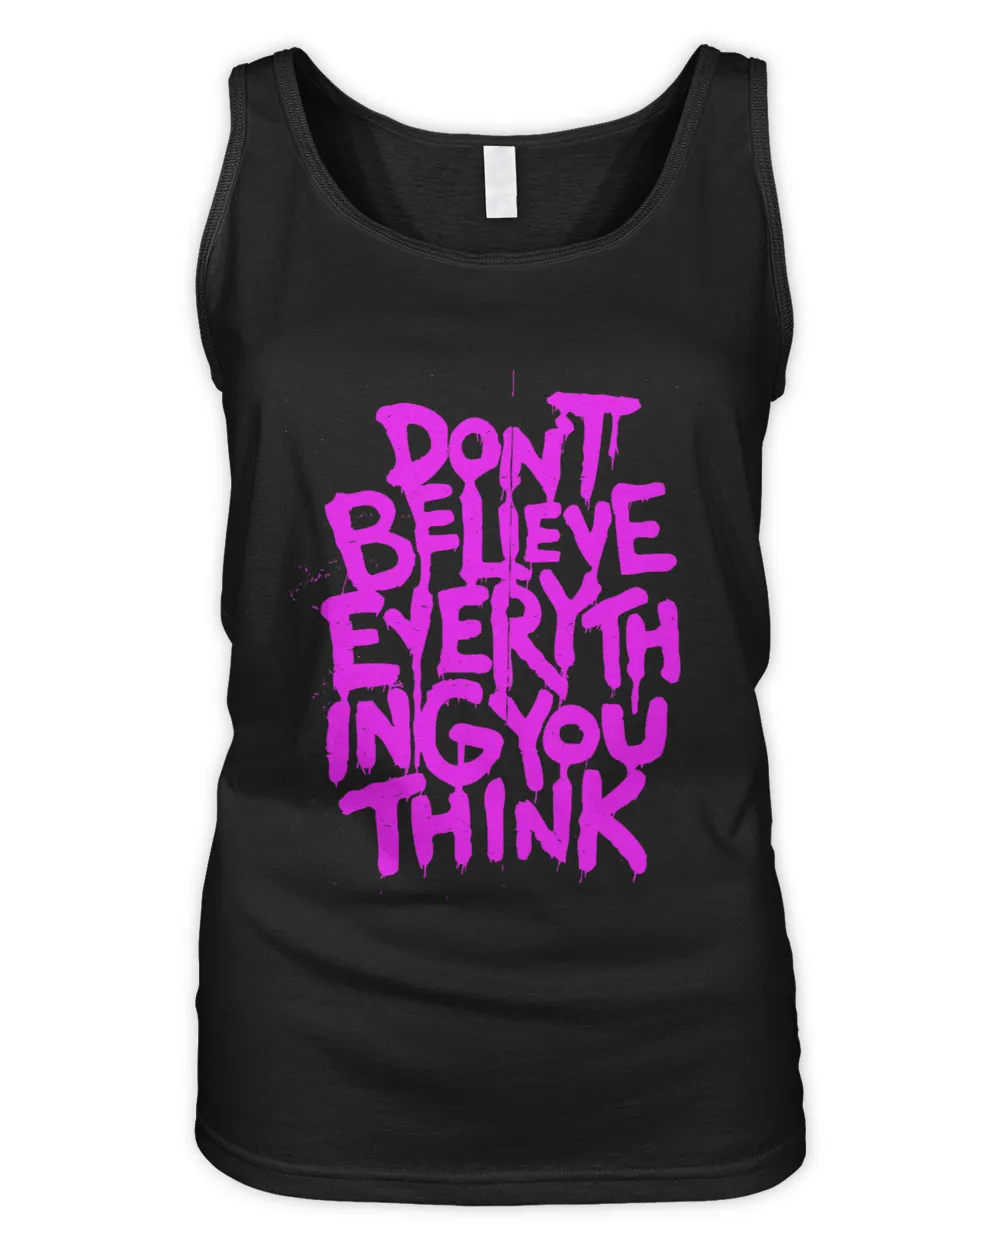 Dont Believe Everything That You Read Or Think Truth Shirt